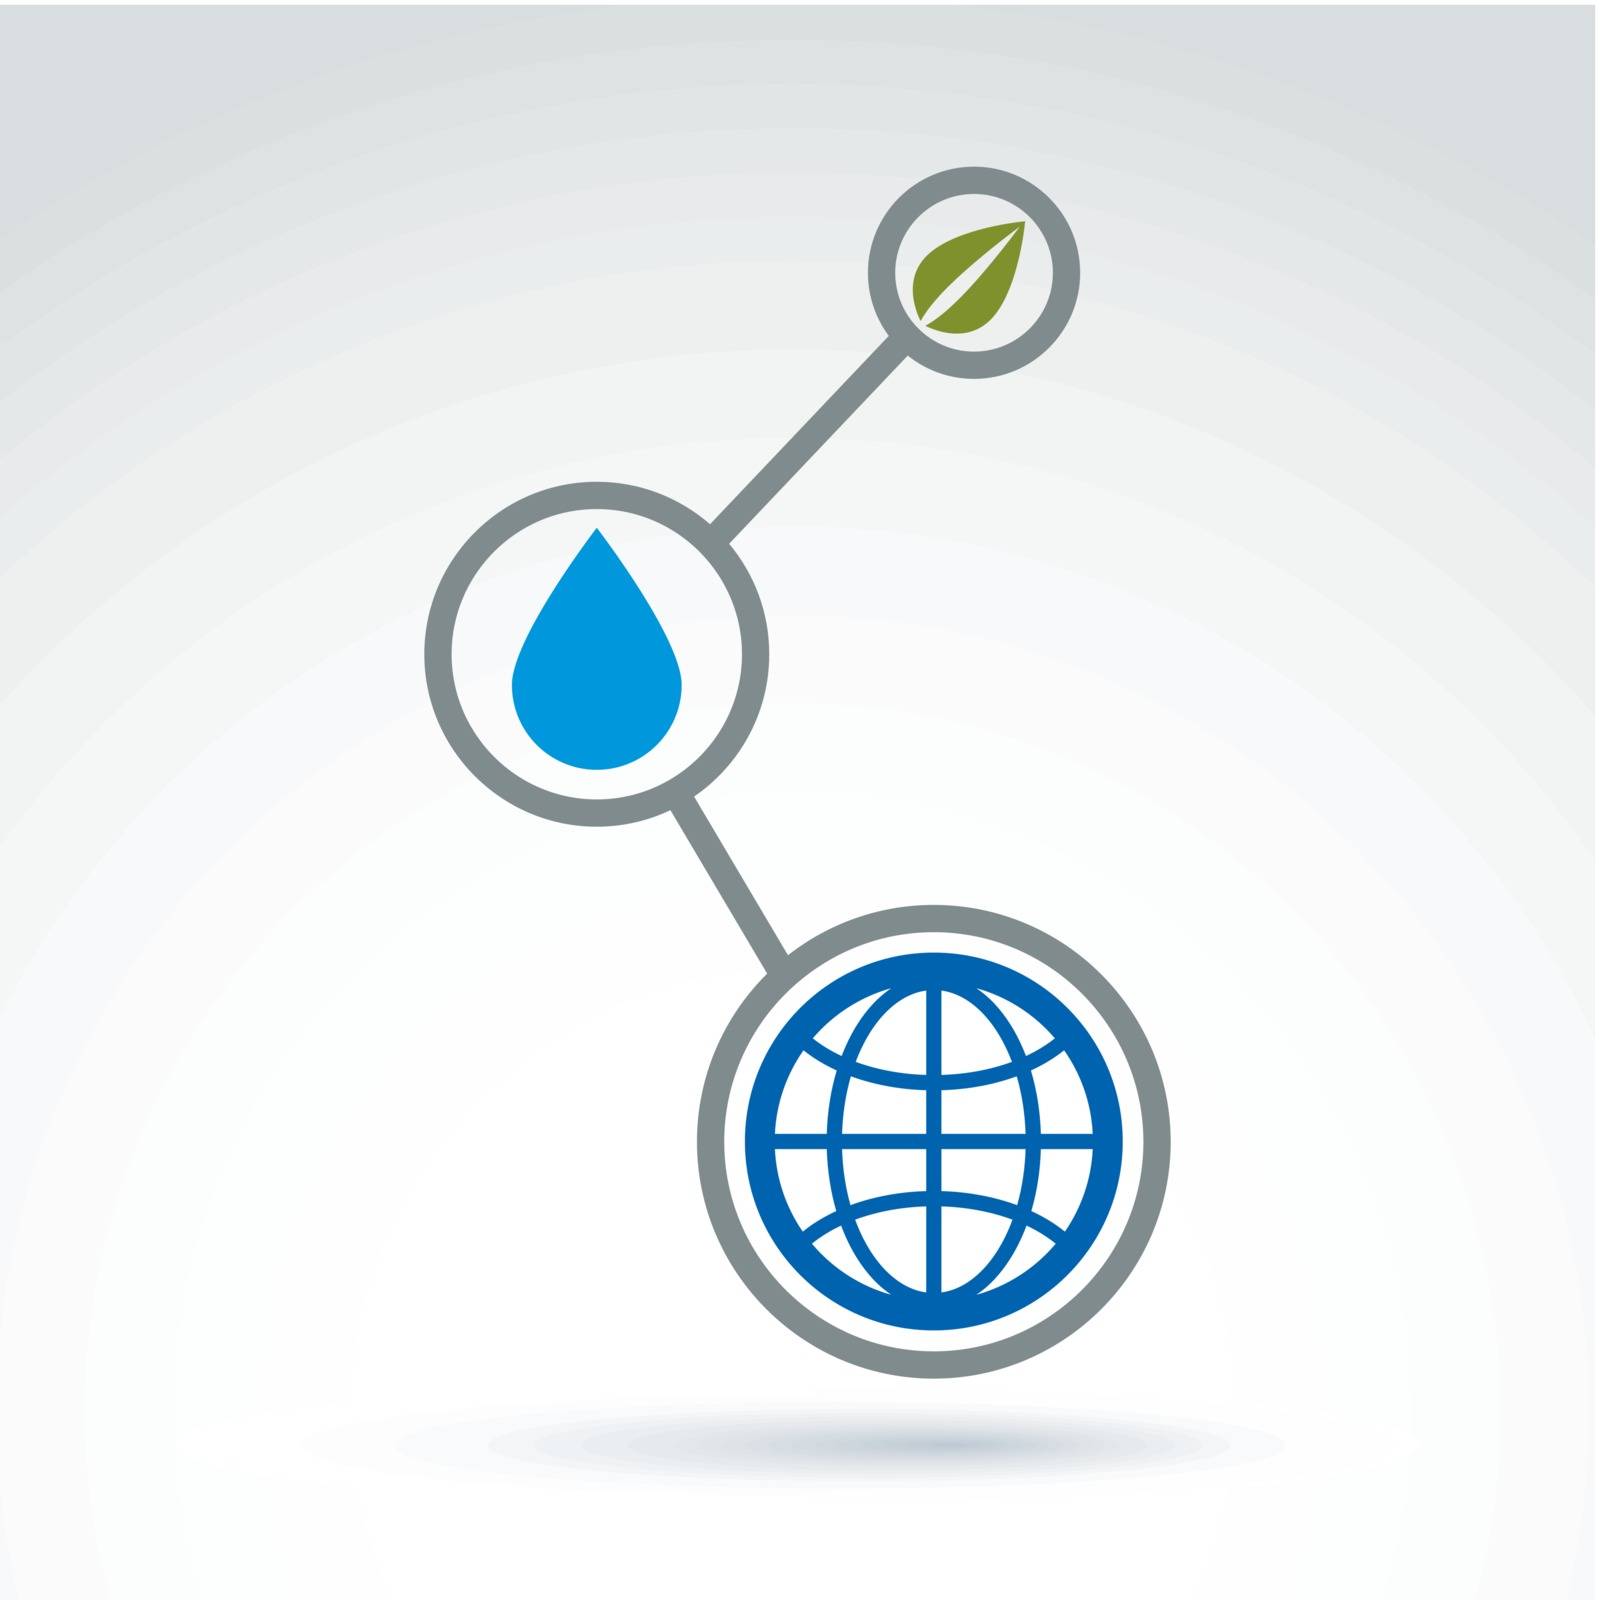 Abstract water, plant and earth connection, vector ecosystem conceptual icon. Ecology emblem on planetary resources idea.